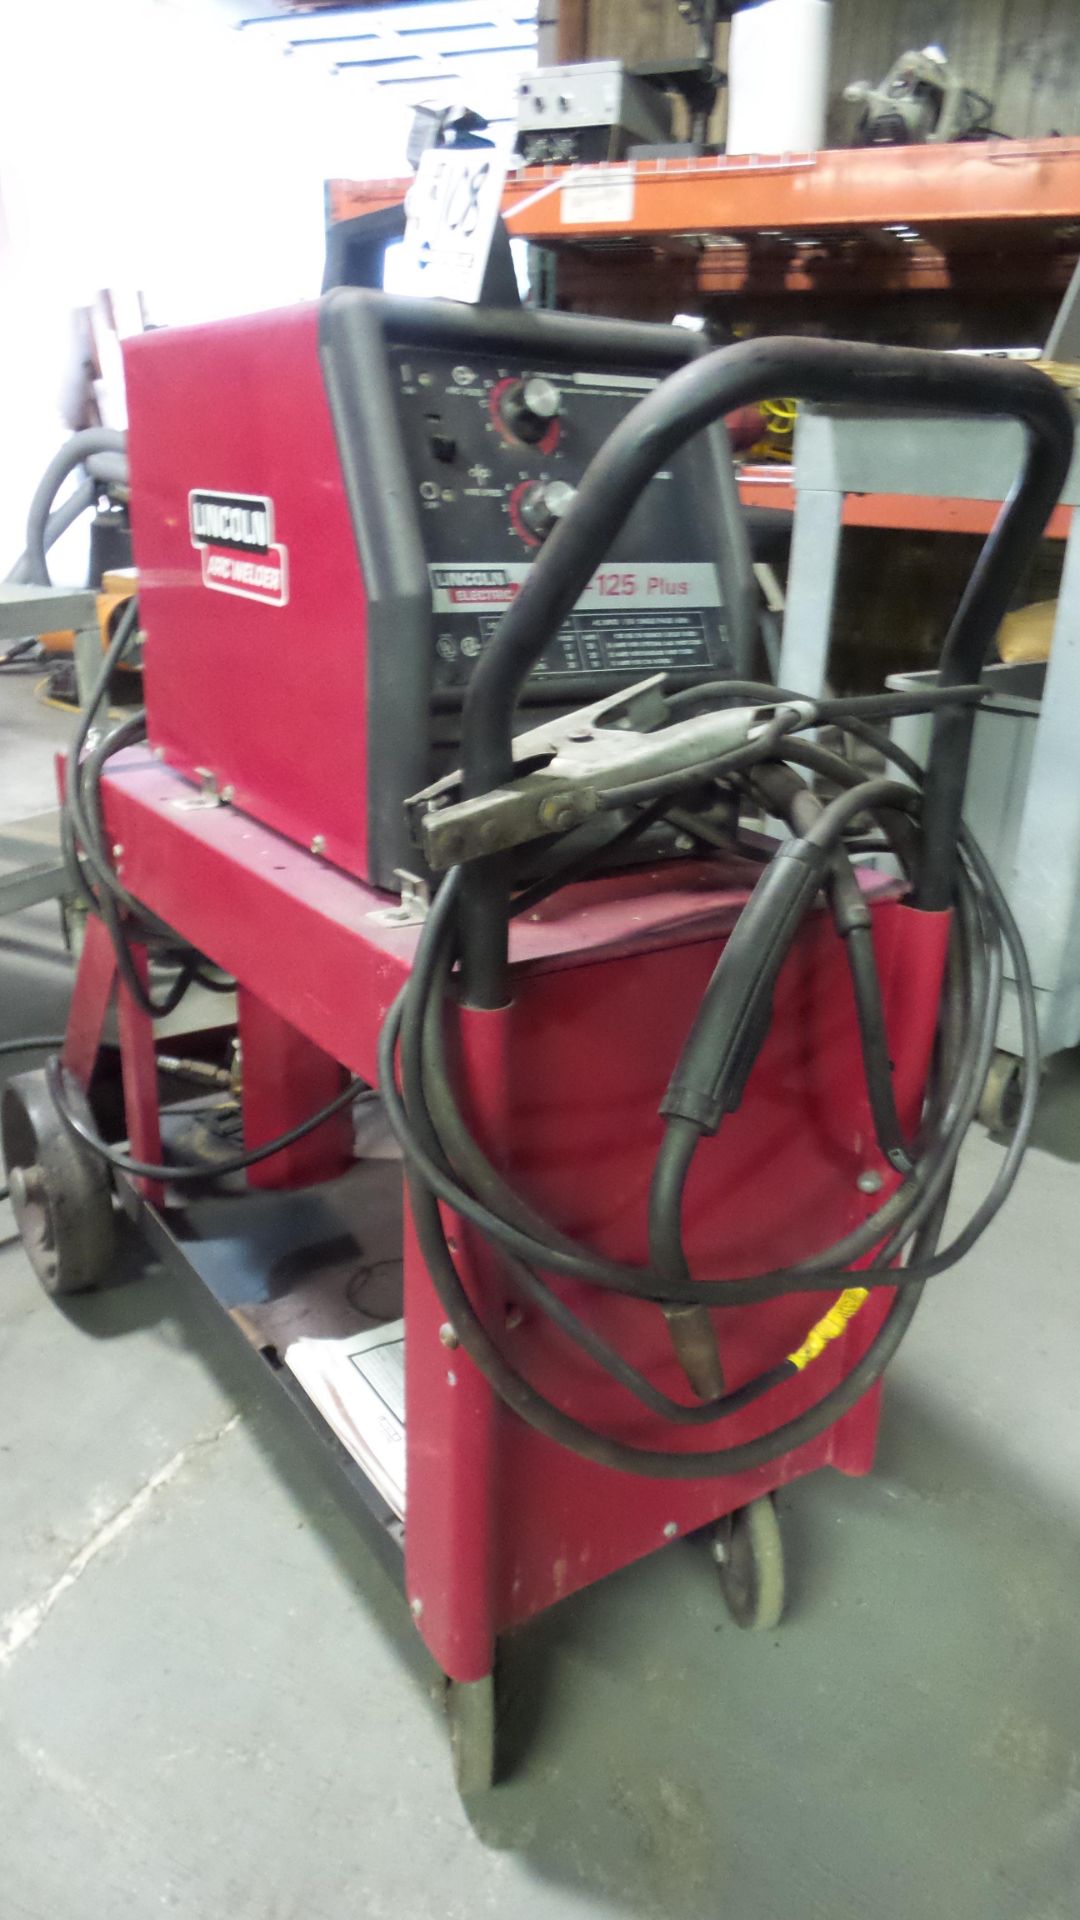 Lincoln SP-125 Plus Wire Feed Mig Welder Gauges, Lead, and cart